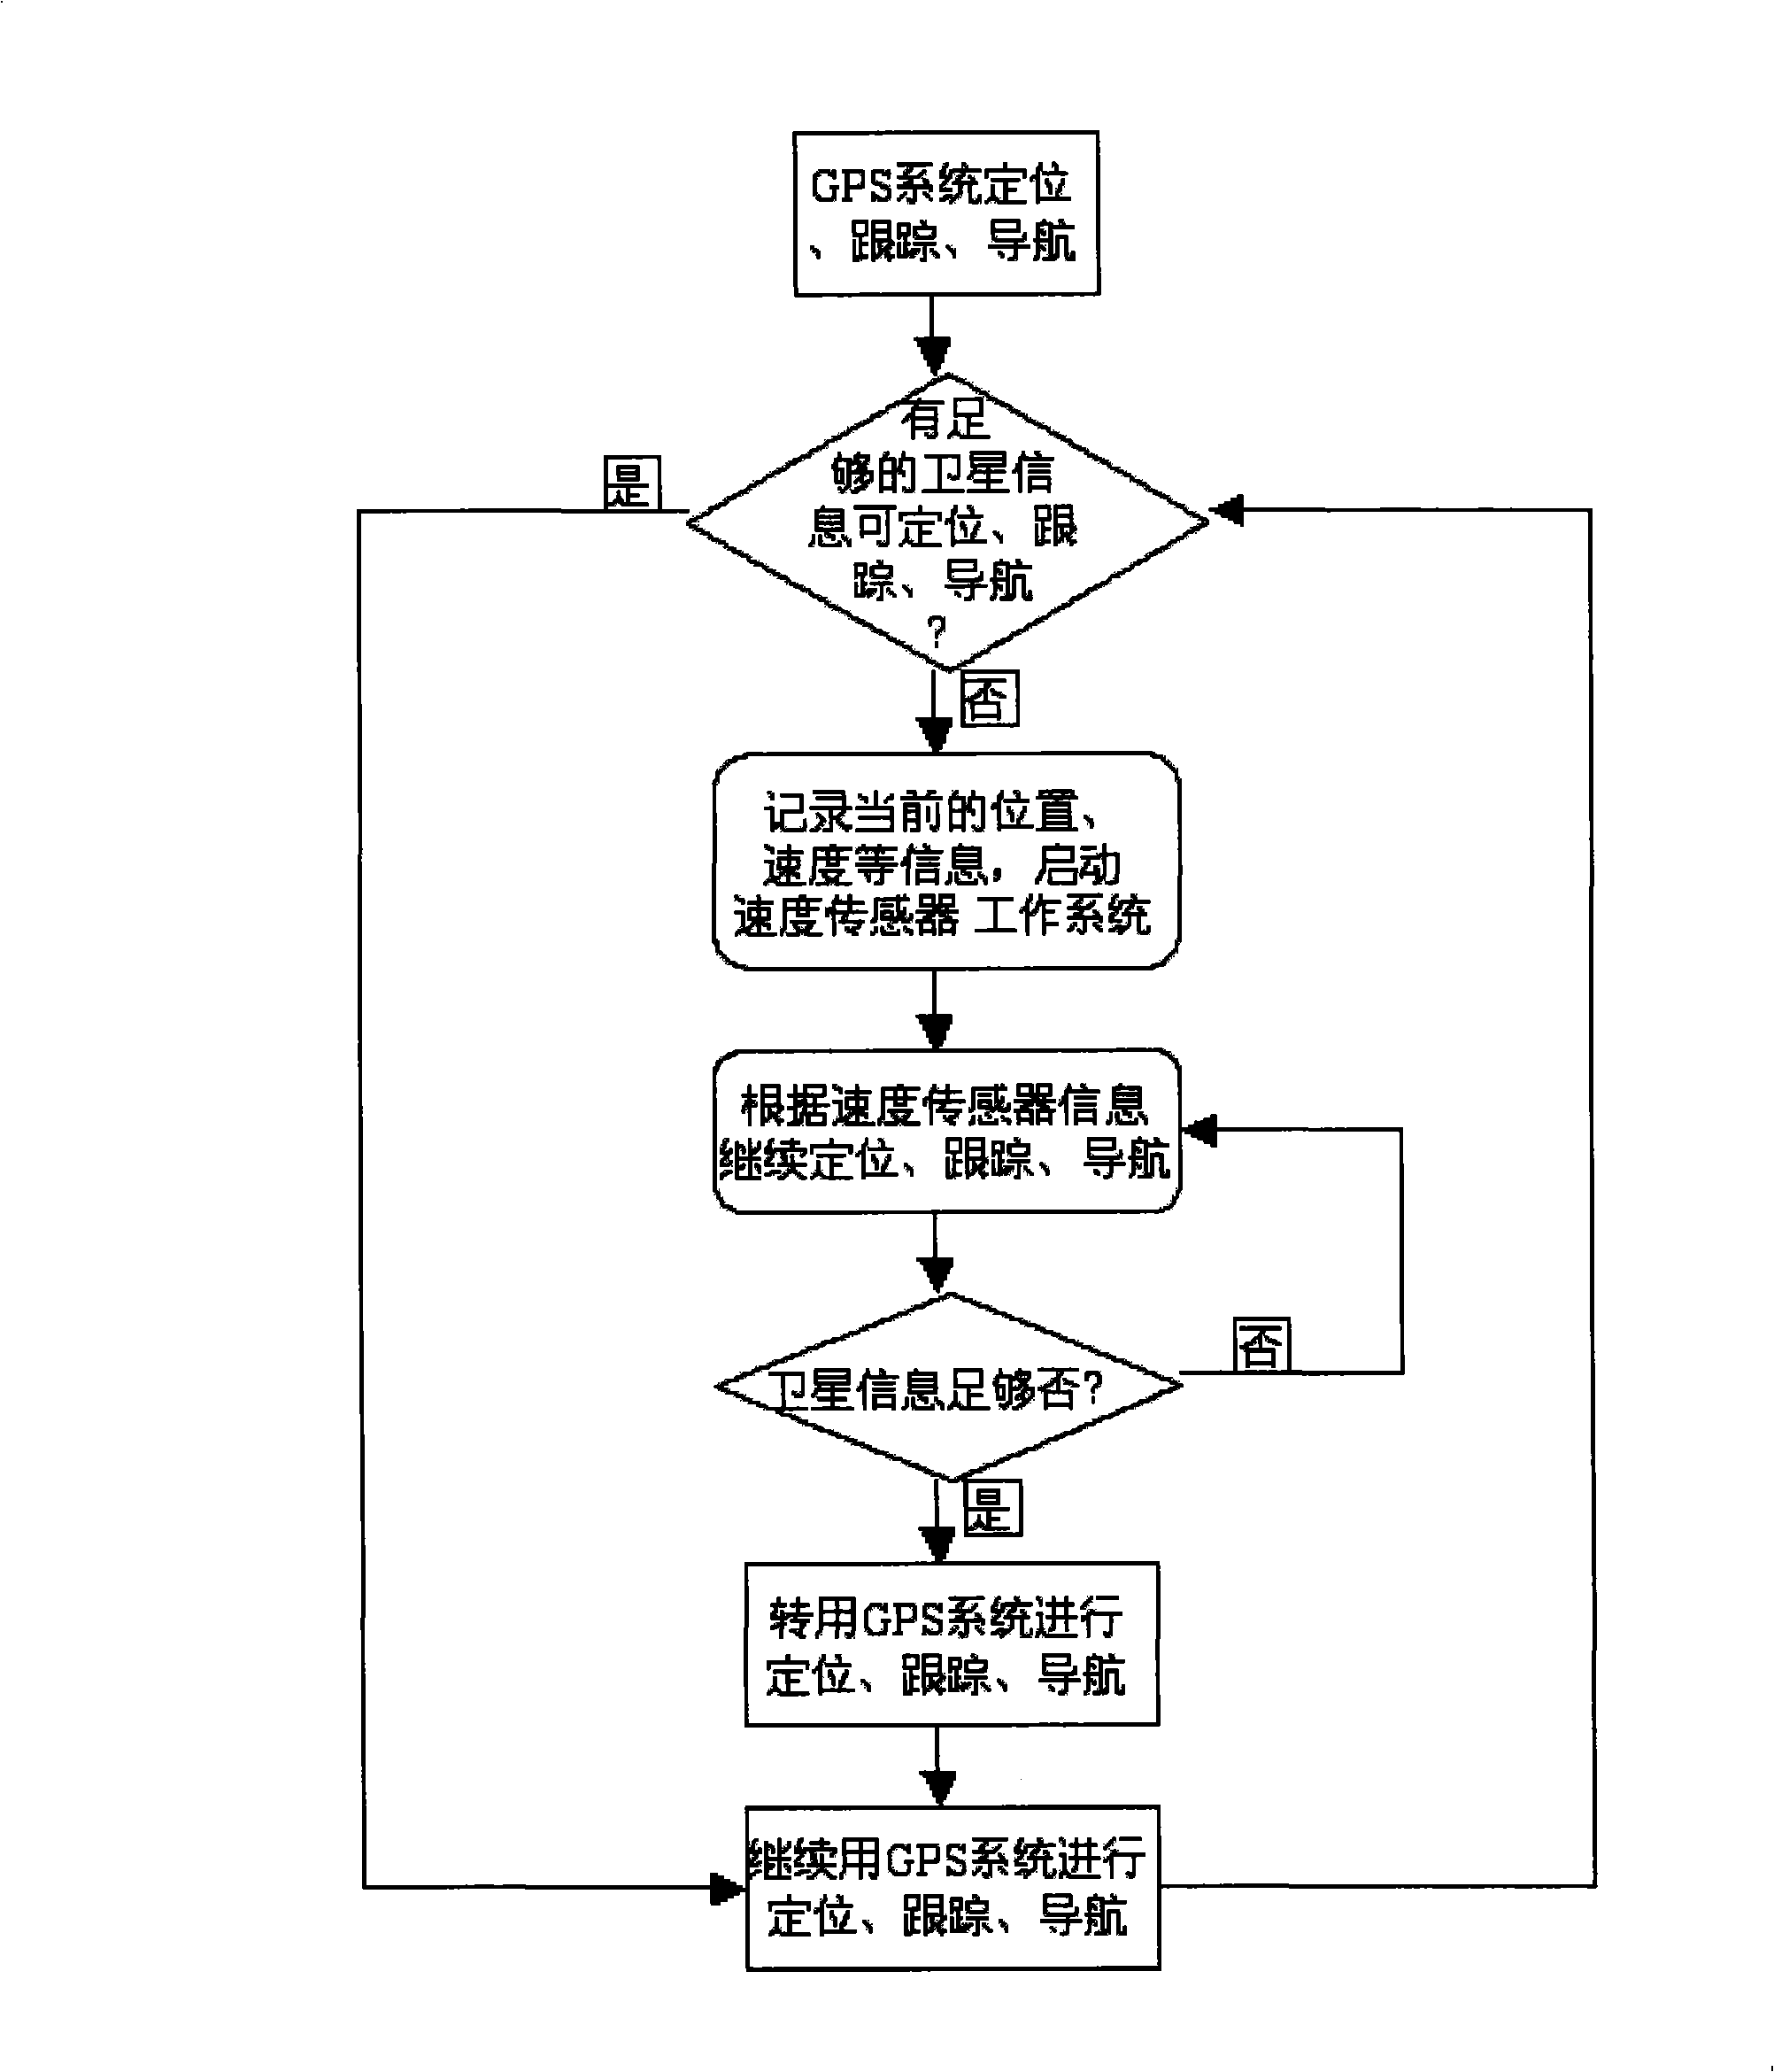 Method and system for compensating inability of positioning, tracking and navigation of GPS system